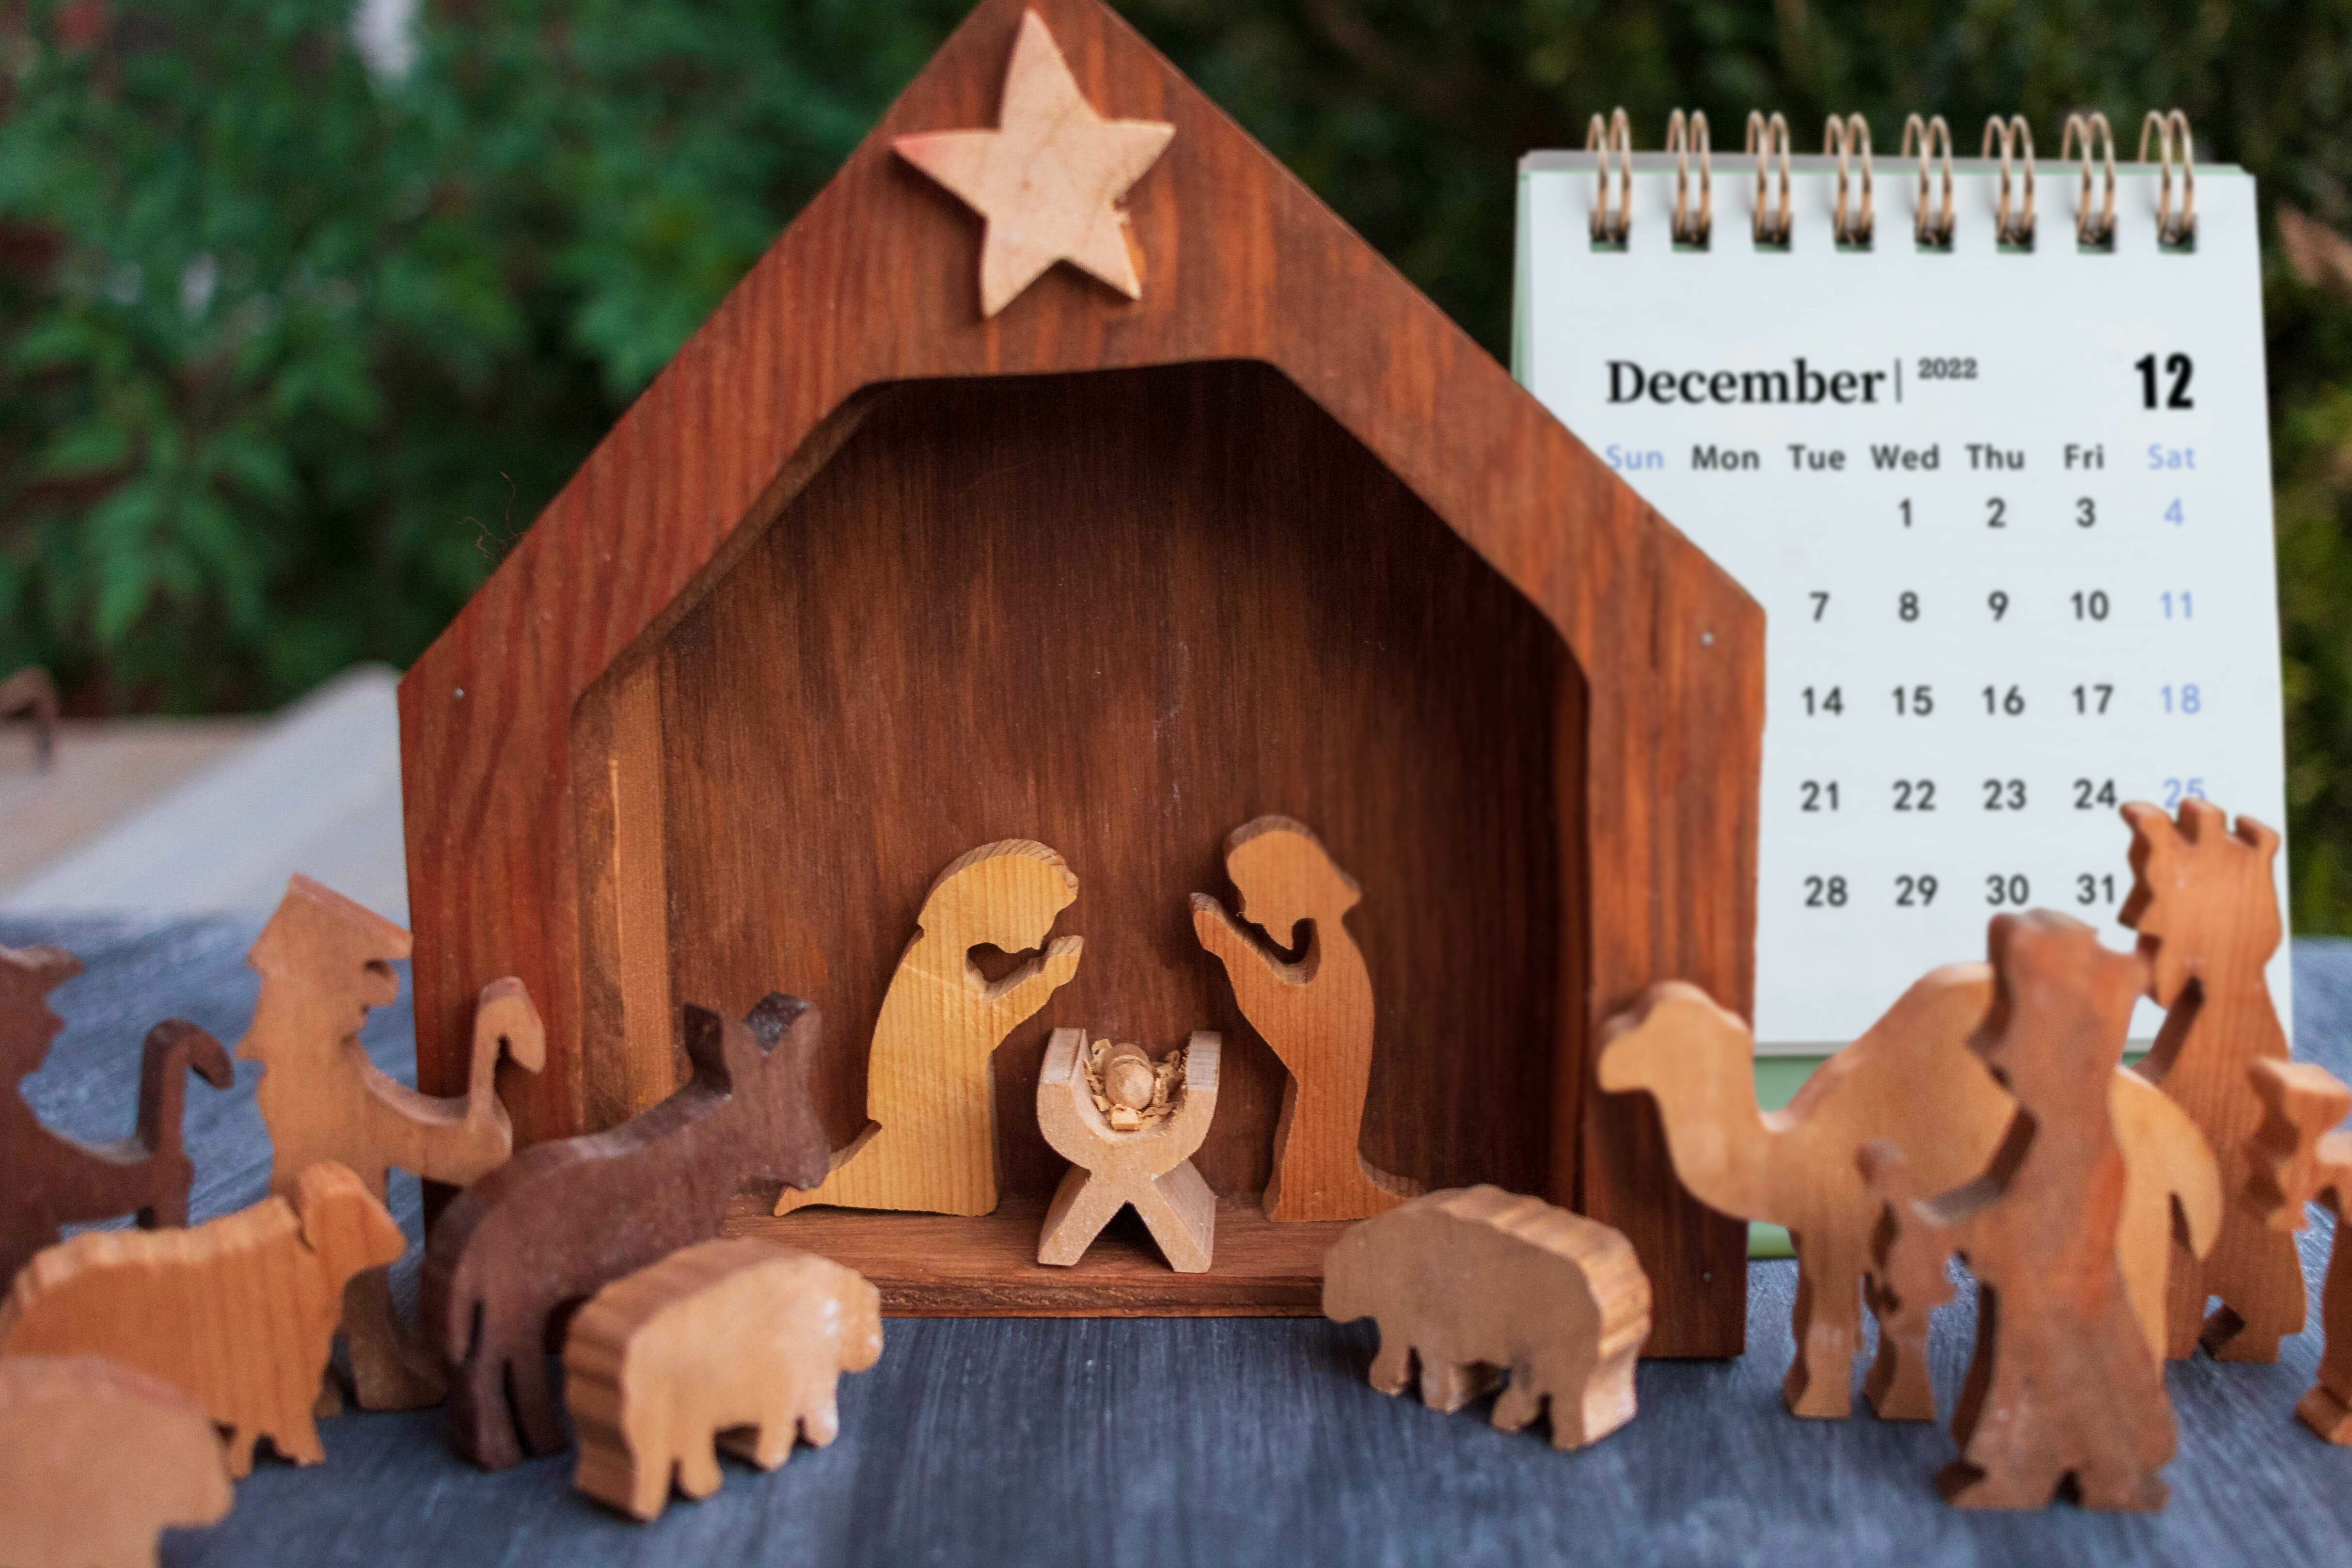 A nativity scene in front of a Christmas tree and calendar